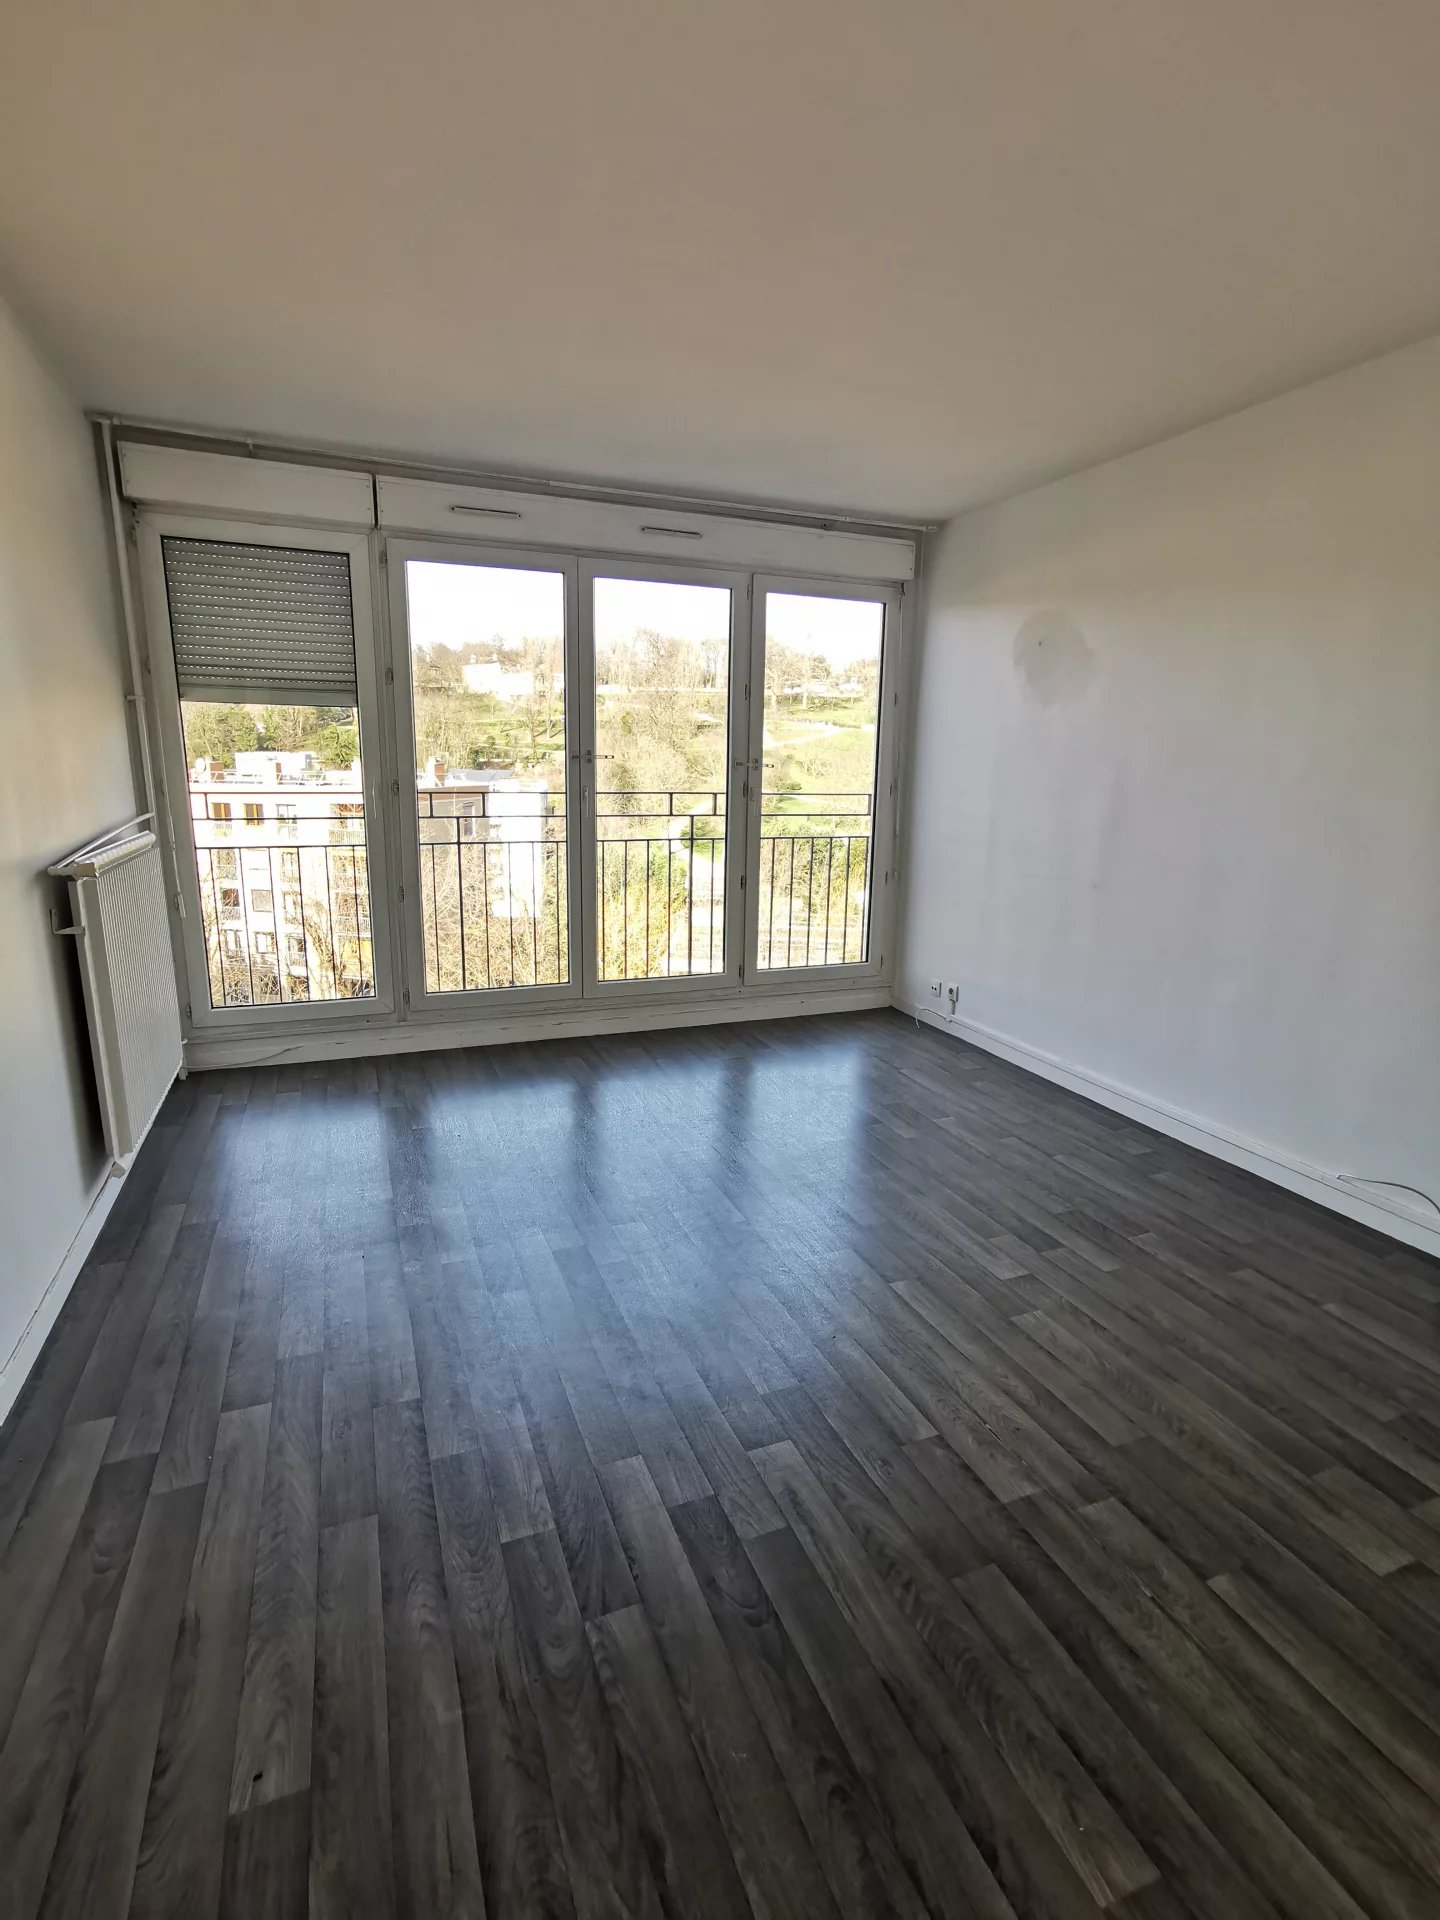 VENTE APPARTEMENT _ F3 _ ATHIS-MONS